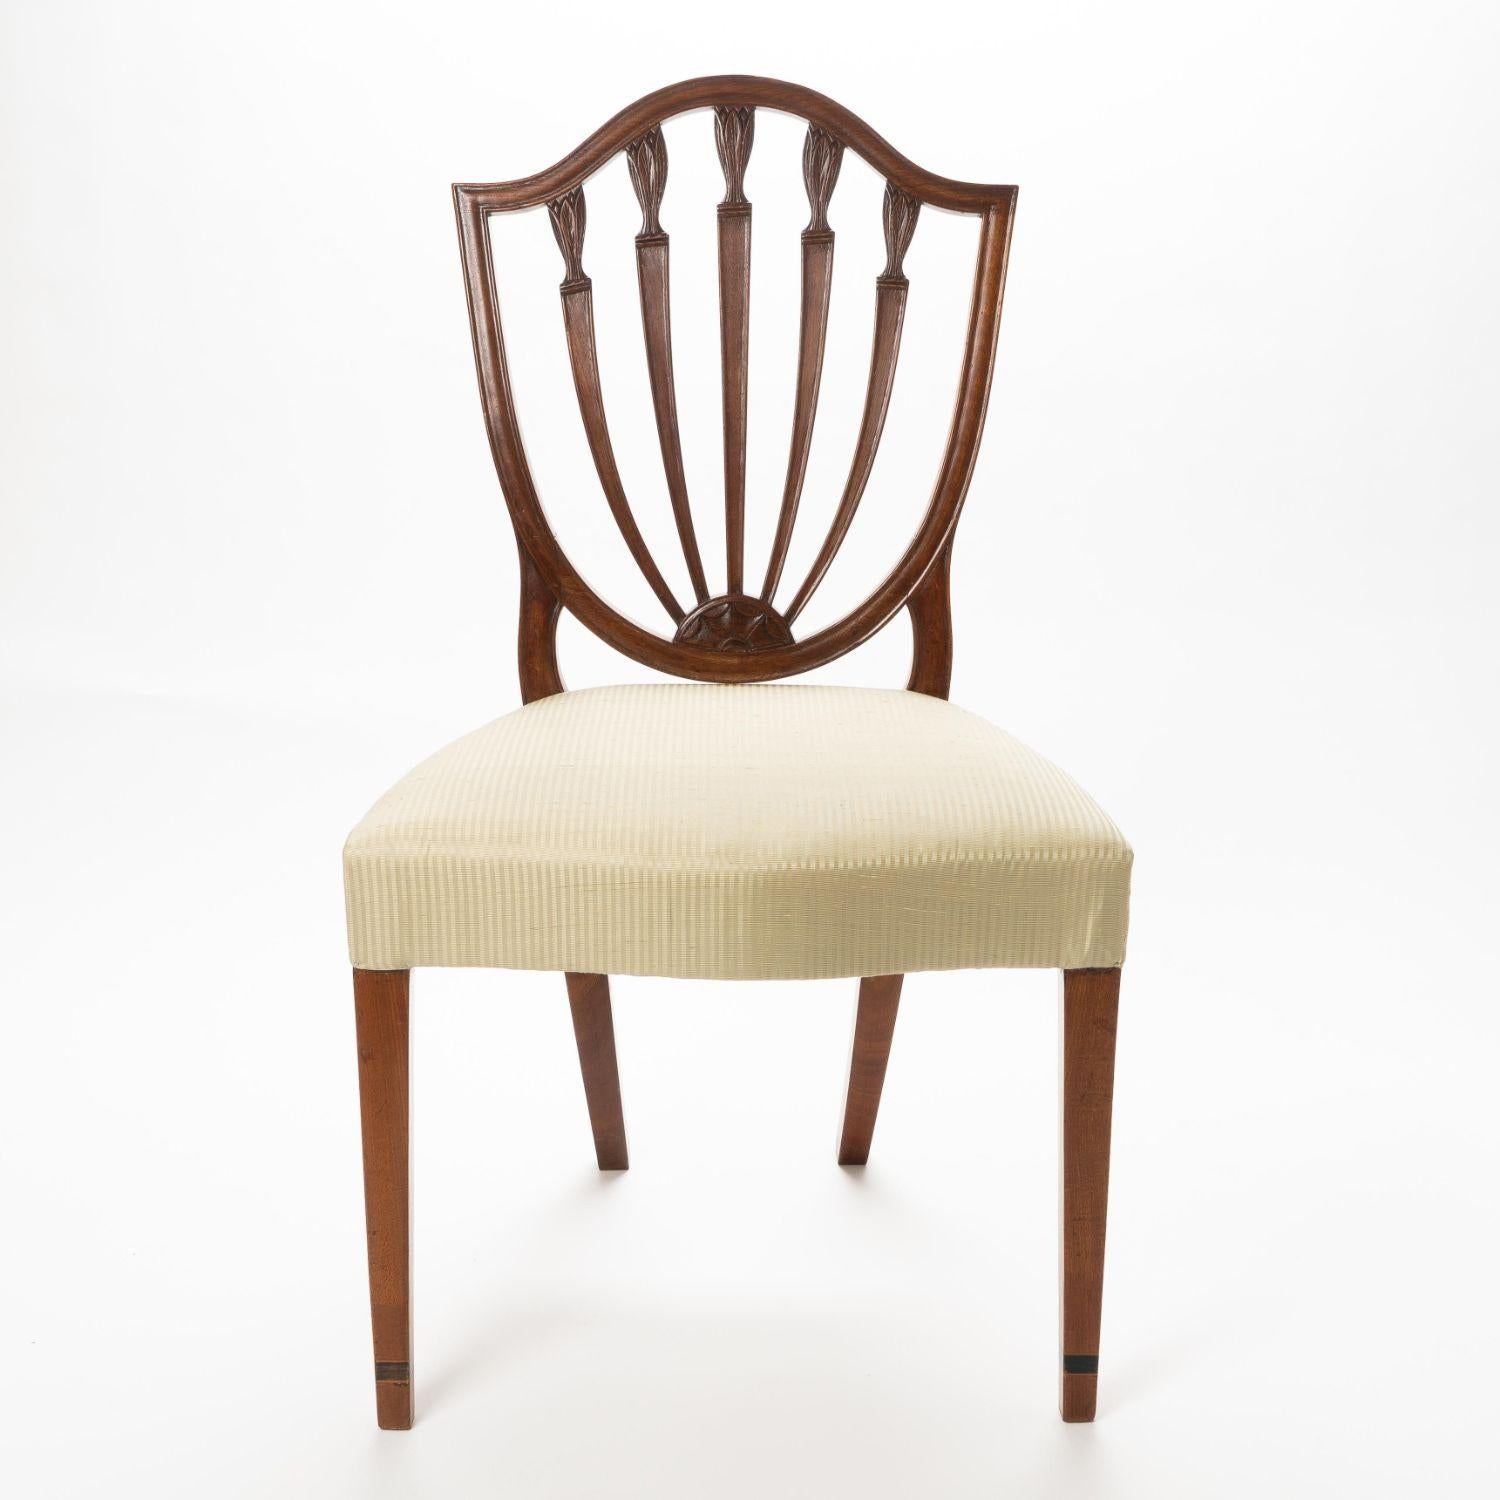 American Mahogany Shield Back Side Chair with Serpentine Seat, c. 1790 For Sale 3